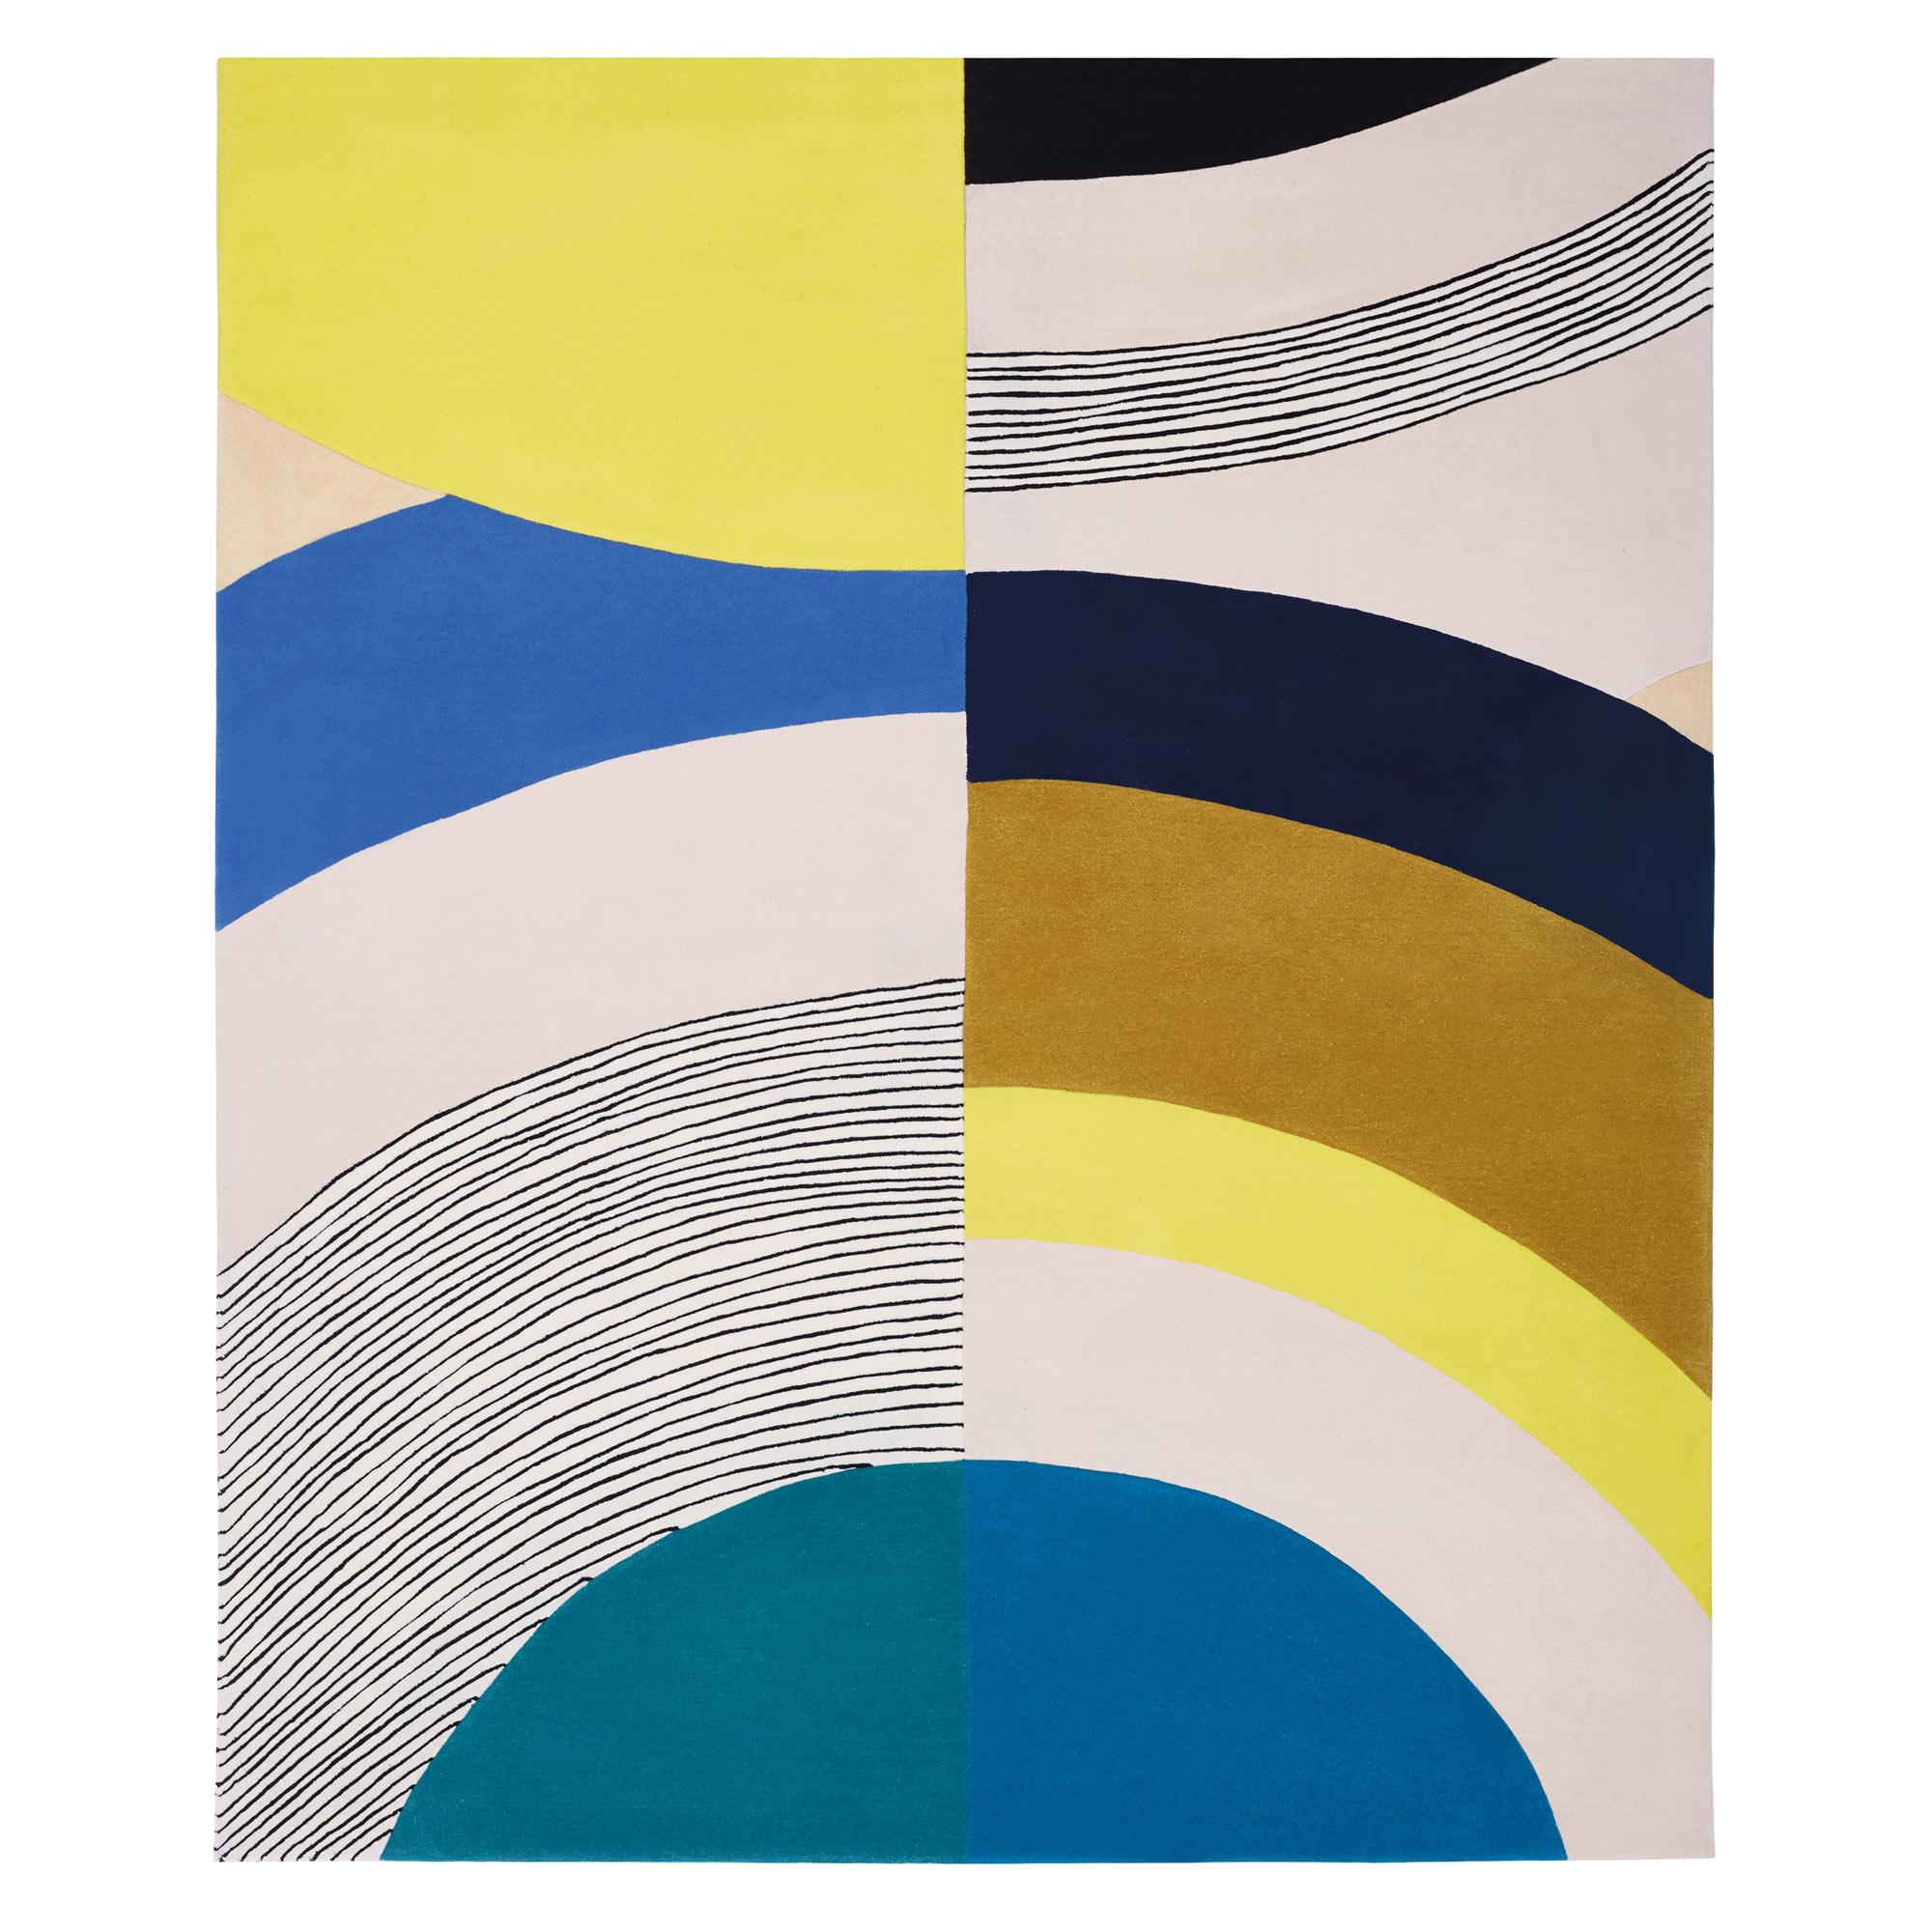 Seoul By Day N°2 rug by Thomas Dariel 
Dimensions: D 240 x W 200 cm 
Materials: New Zealand Wool and Viscose. 
Also available in other colors, designs, and dimensions.


The South Korean capital is known for its twenty-five bridges spanning